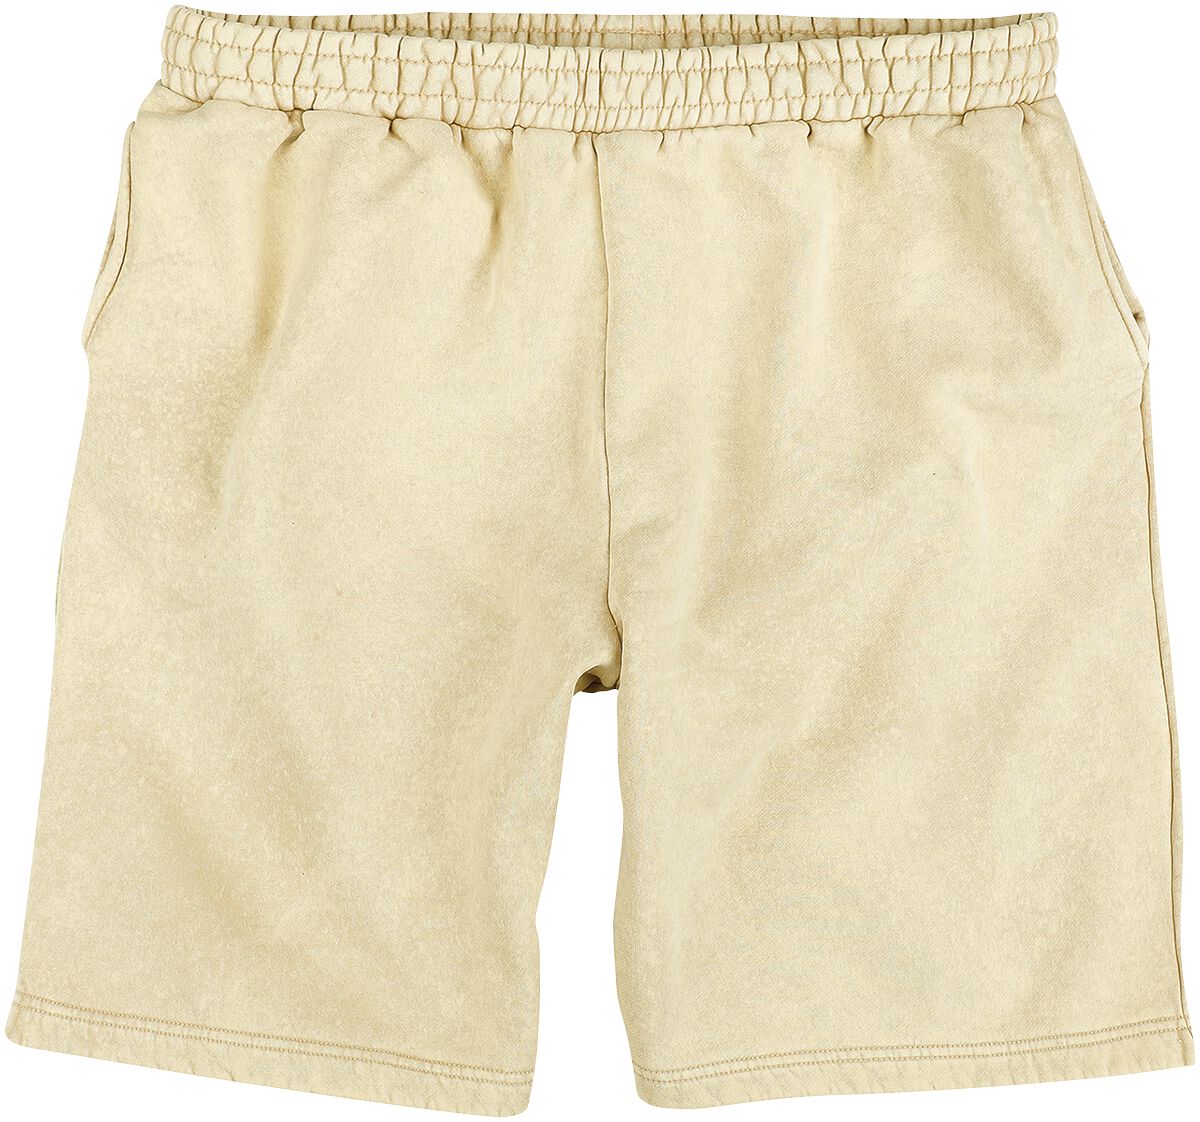 Image of Shorts di Urban Classics - Heavy sand-washed leisurewear shorts - S a M - Uomo - beige